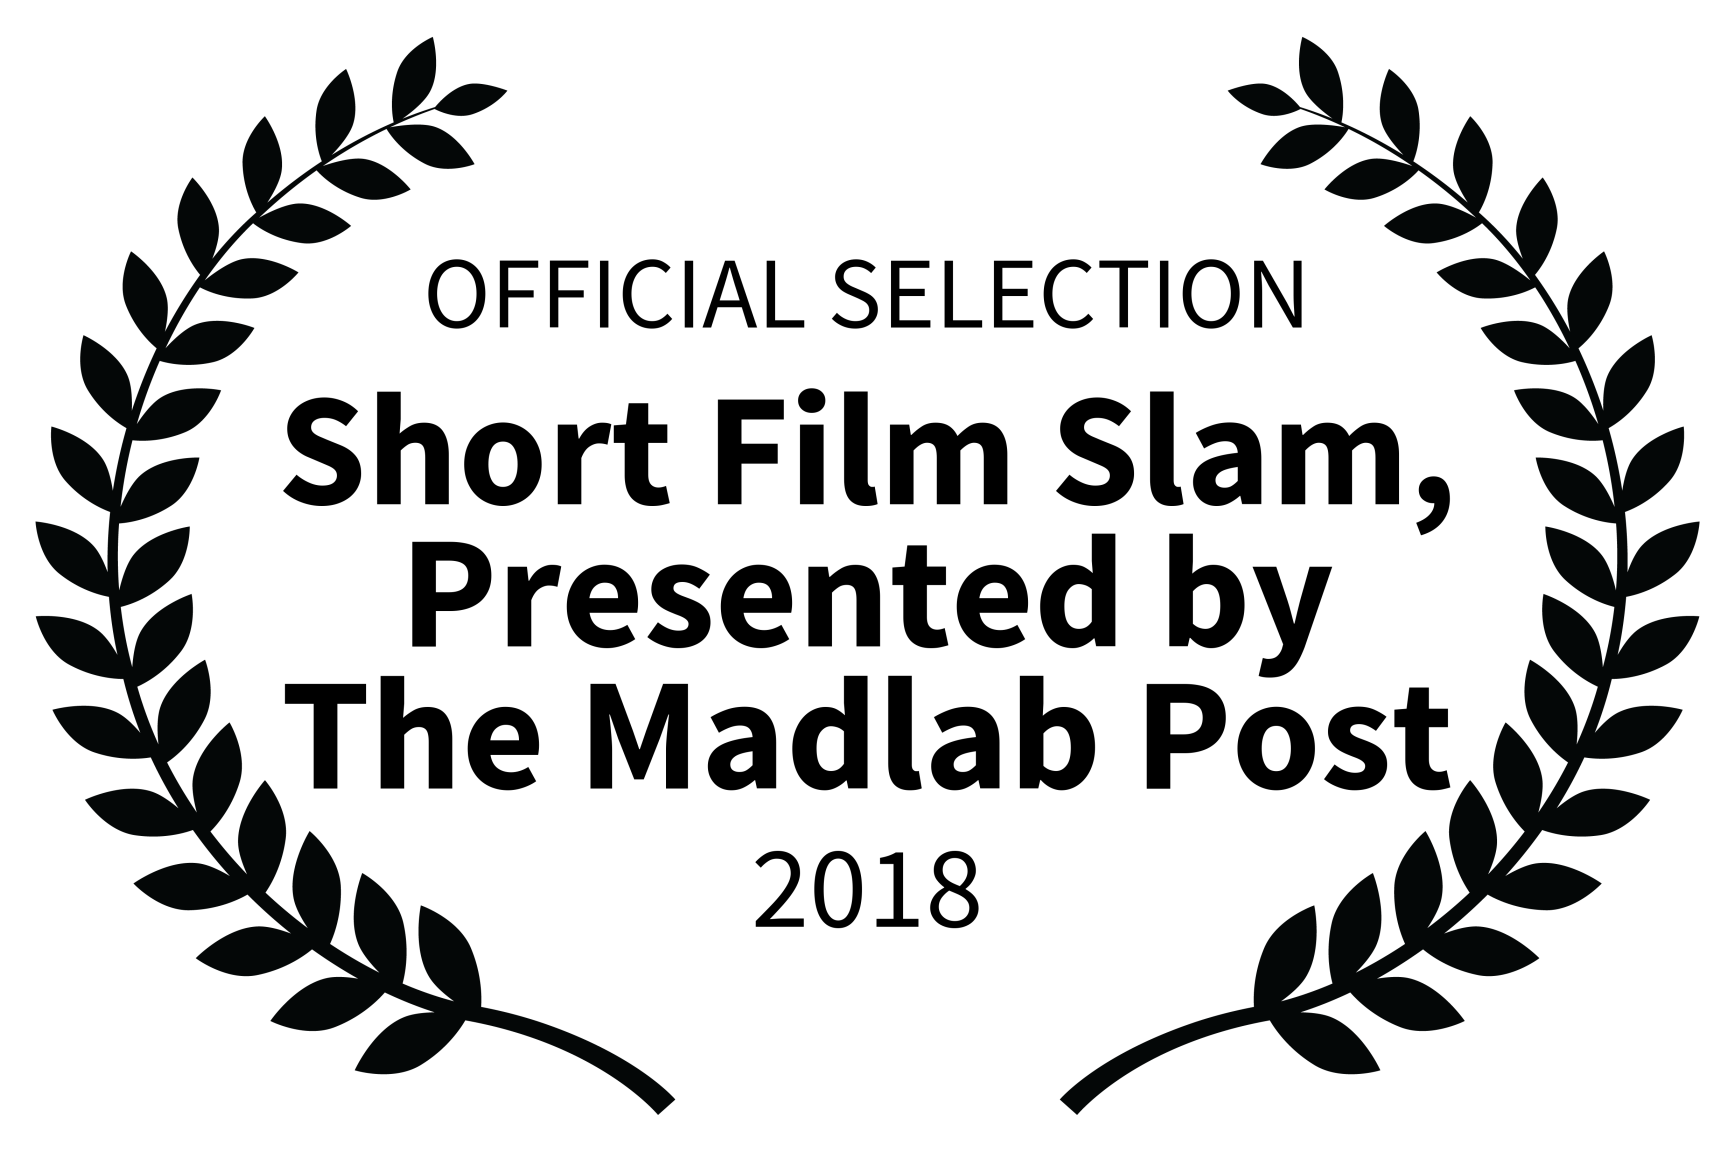 Official Selection Short Film Slam, Presented by The MadlabPost